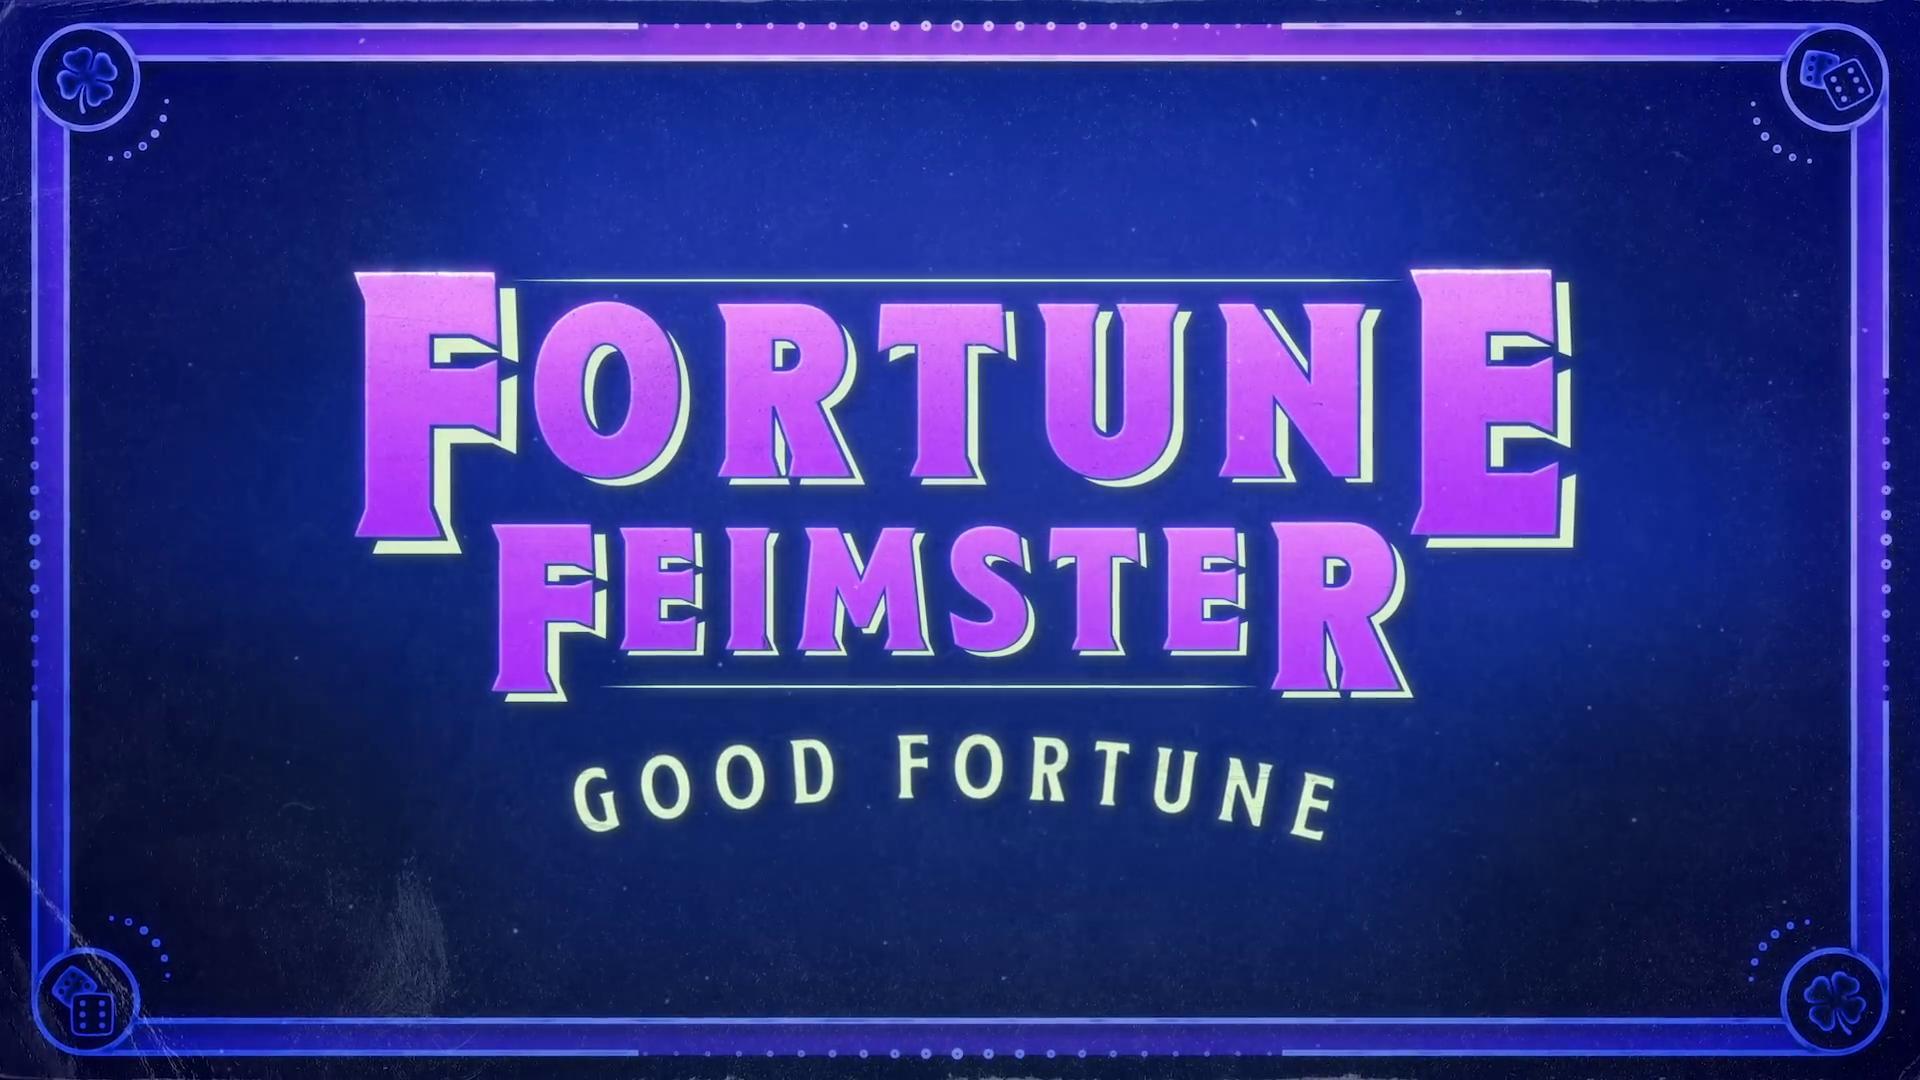 Image gallery for Fortune Feimster: Good Fortune (TV) - FilmAffinity